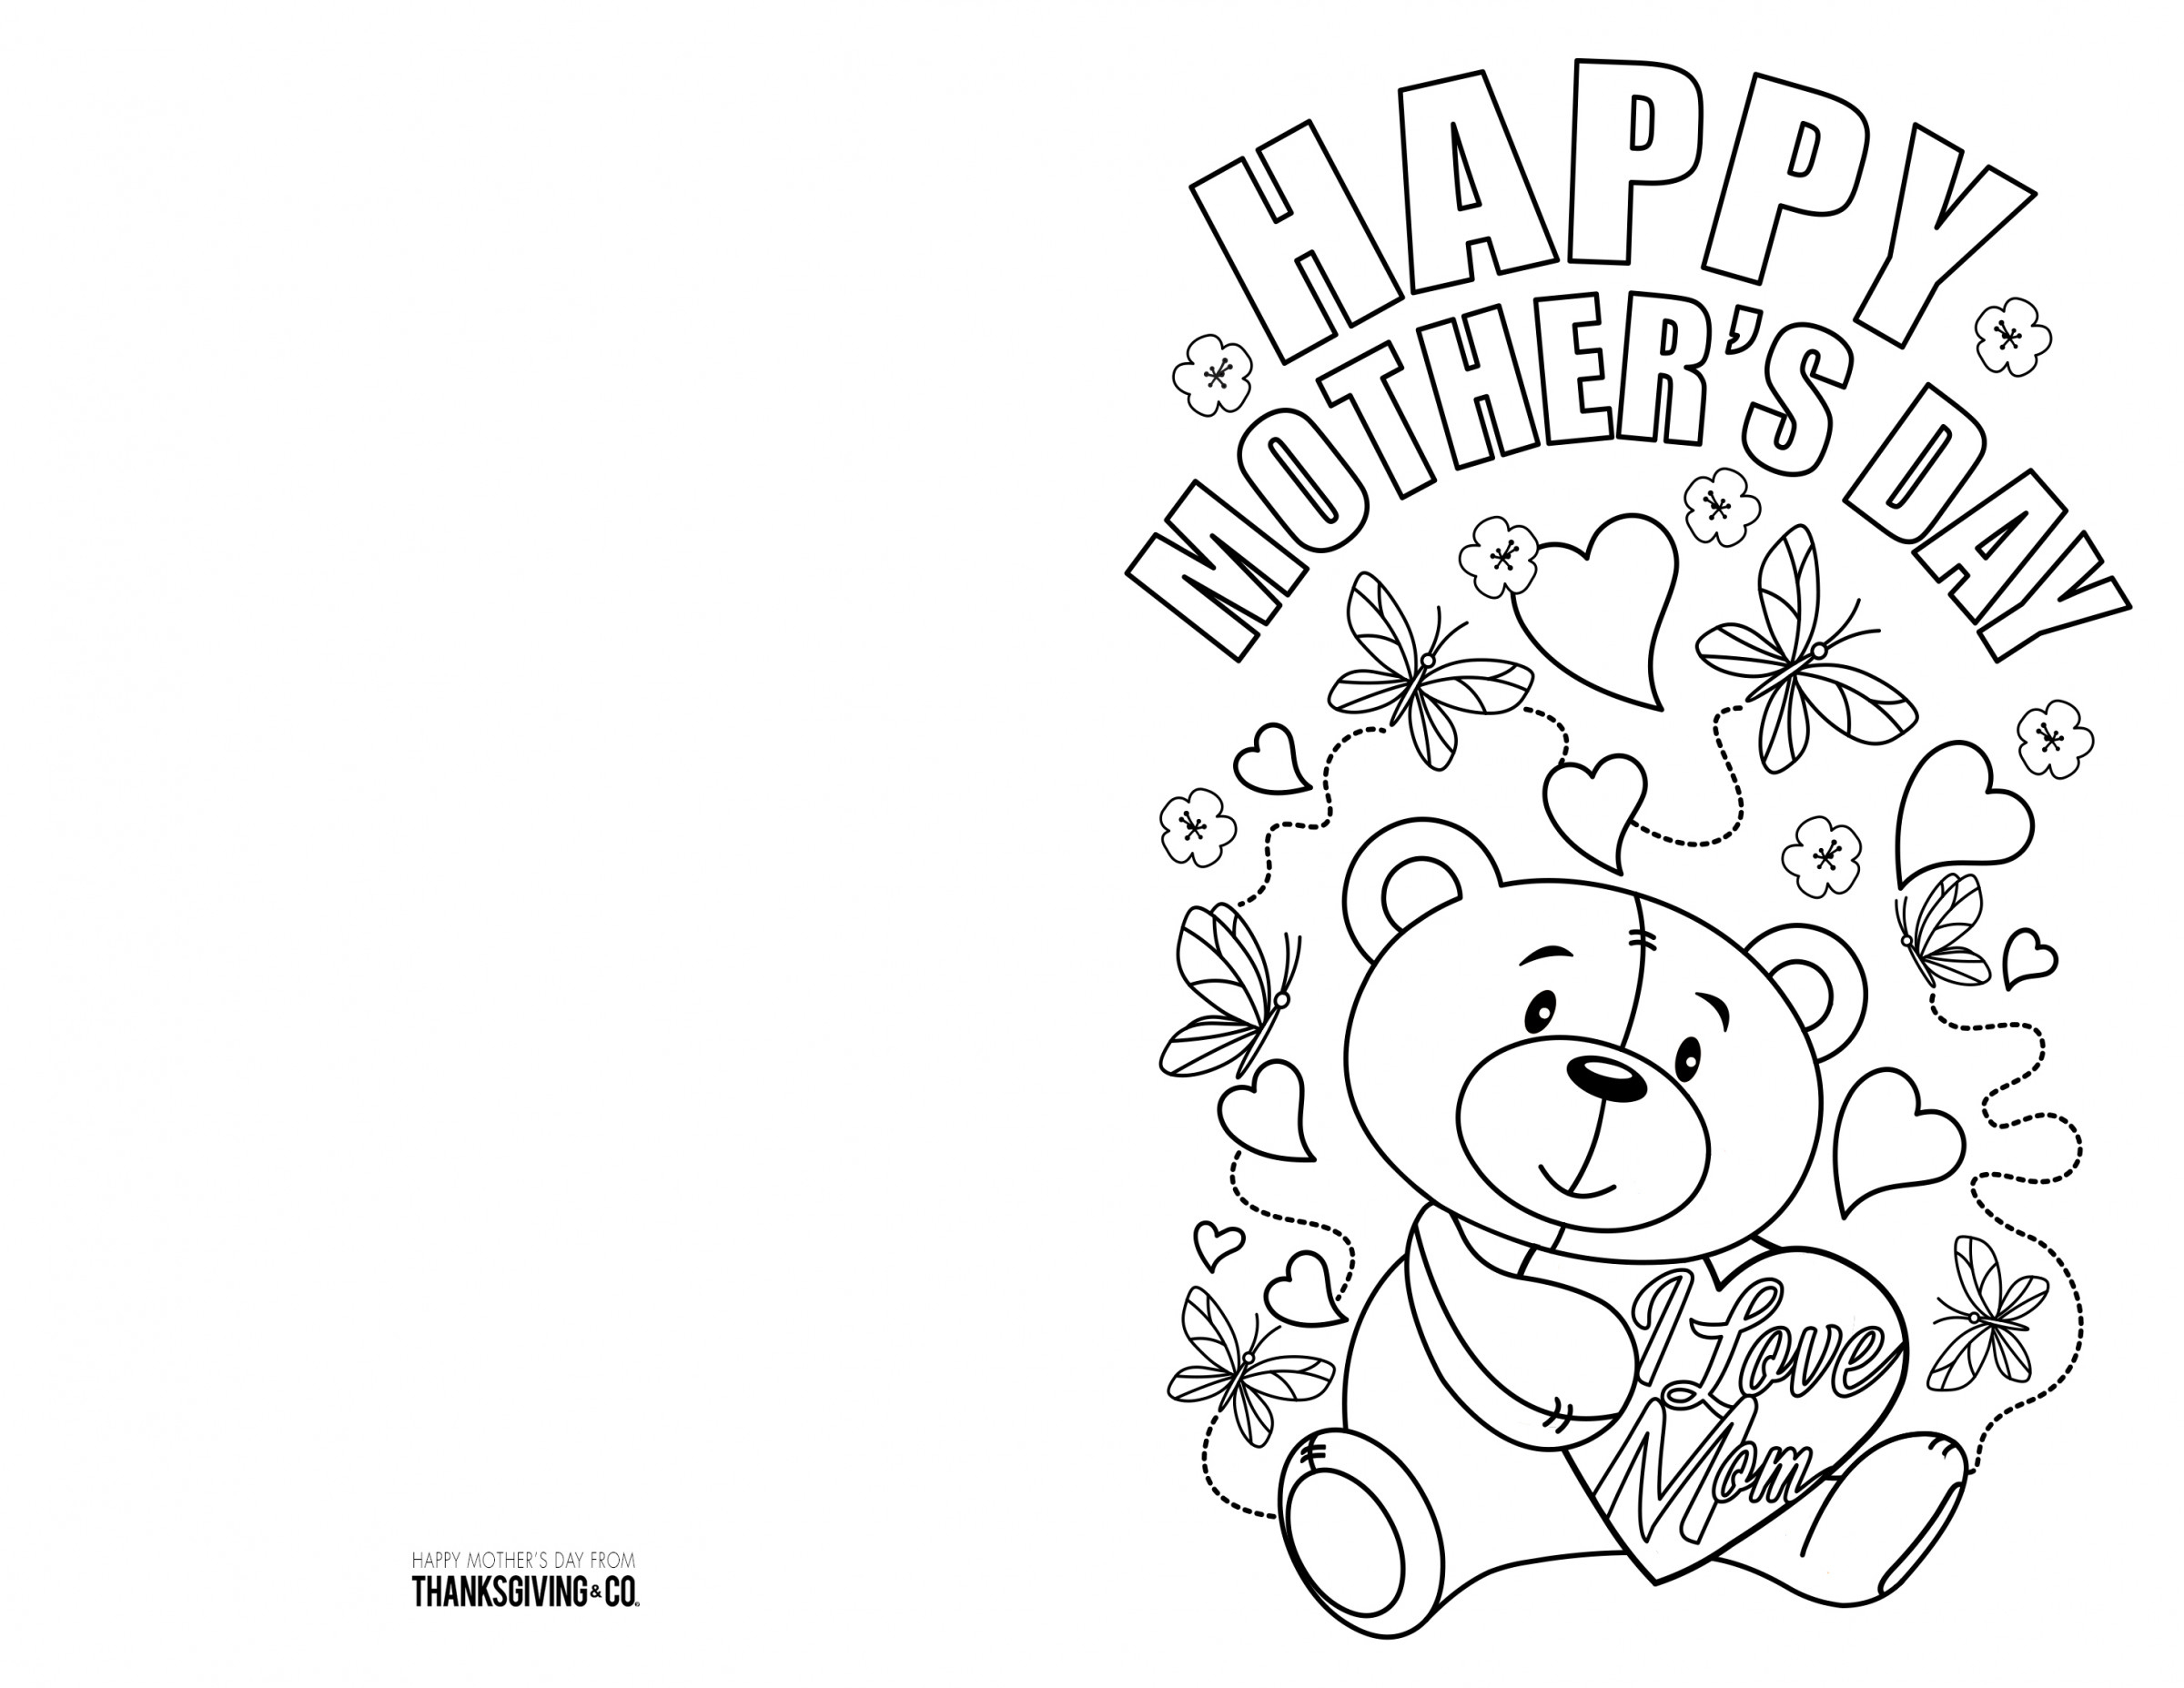 4 Free Printable Mother&amp;#039;s Day Ecards To Color - Thanksgiving - Free Printable Cards To Color